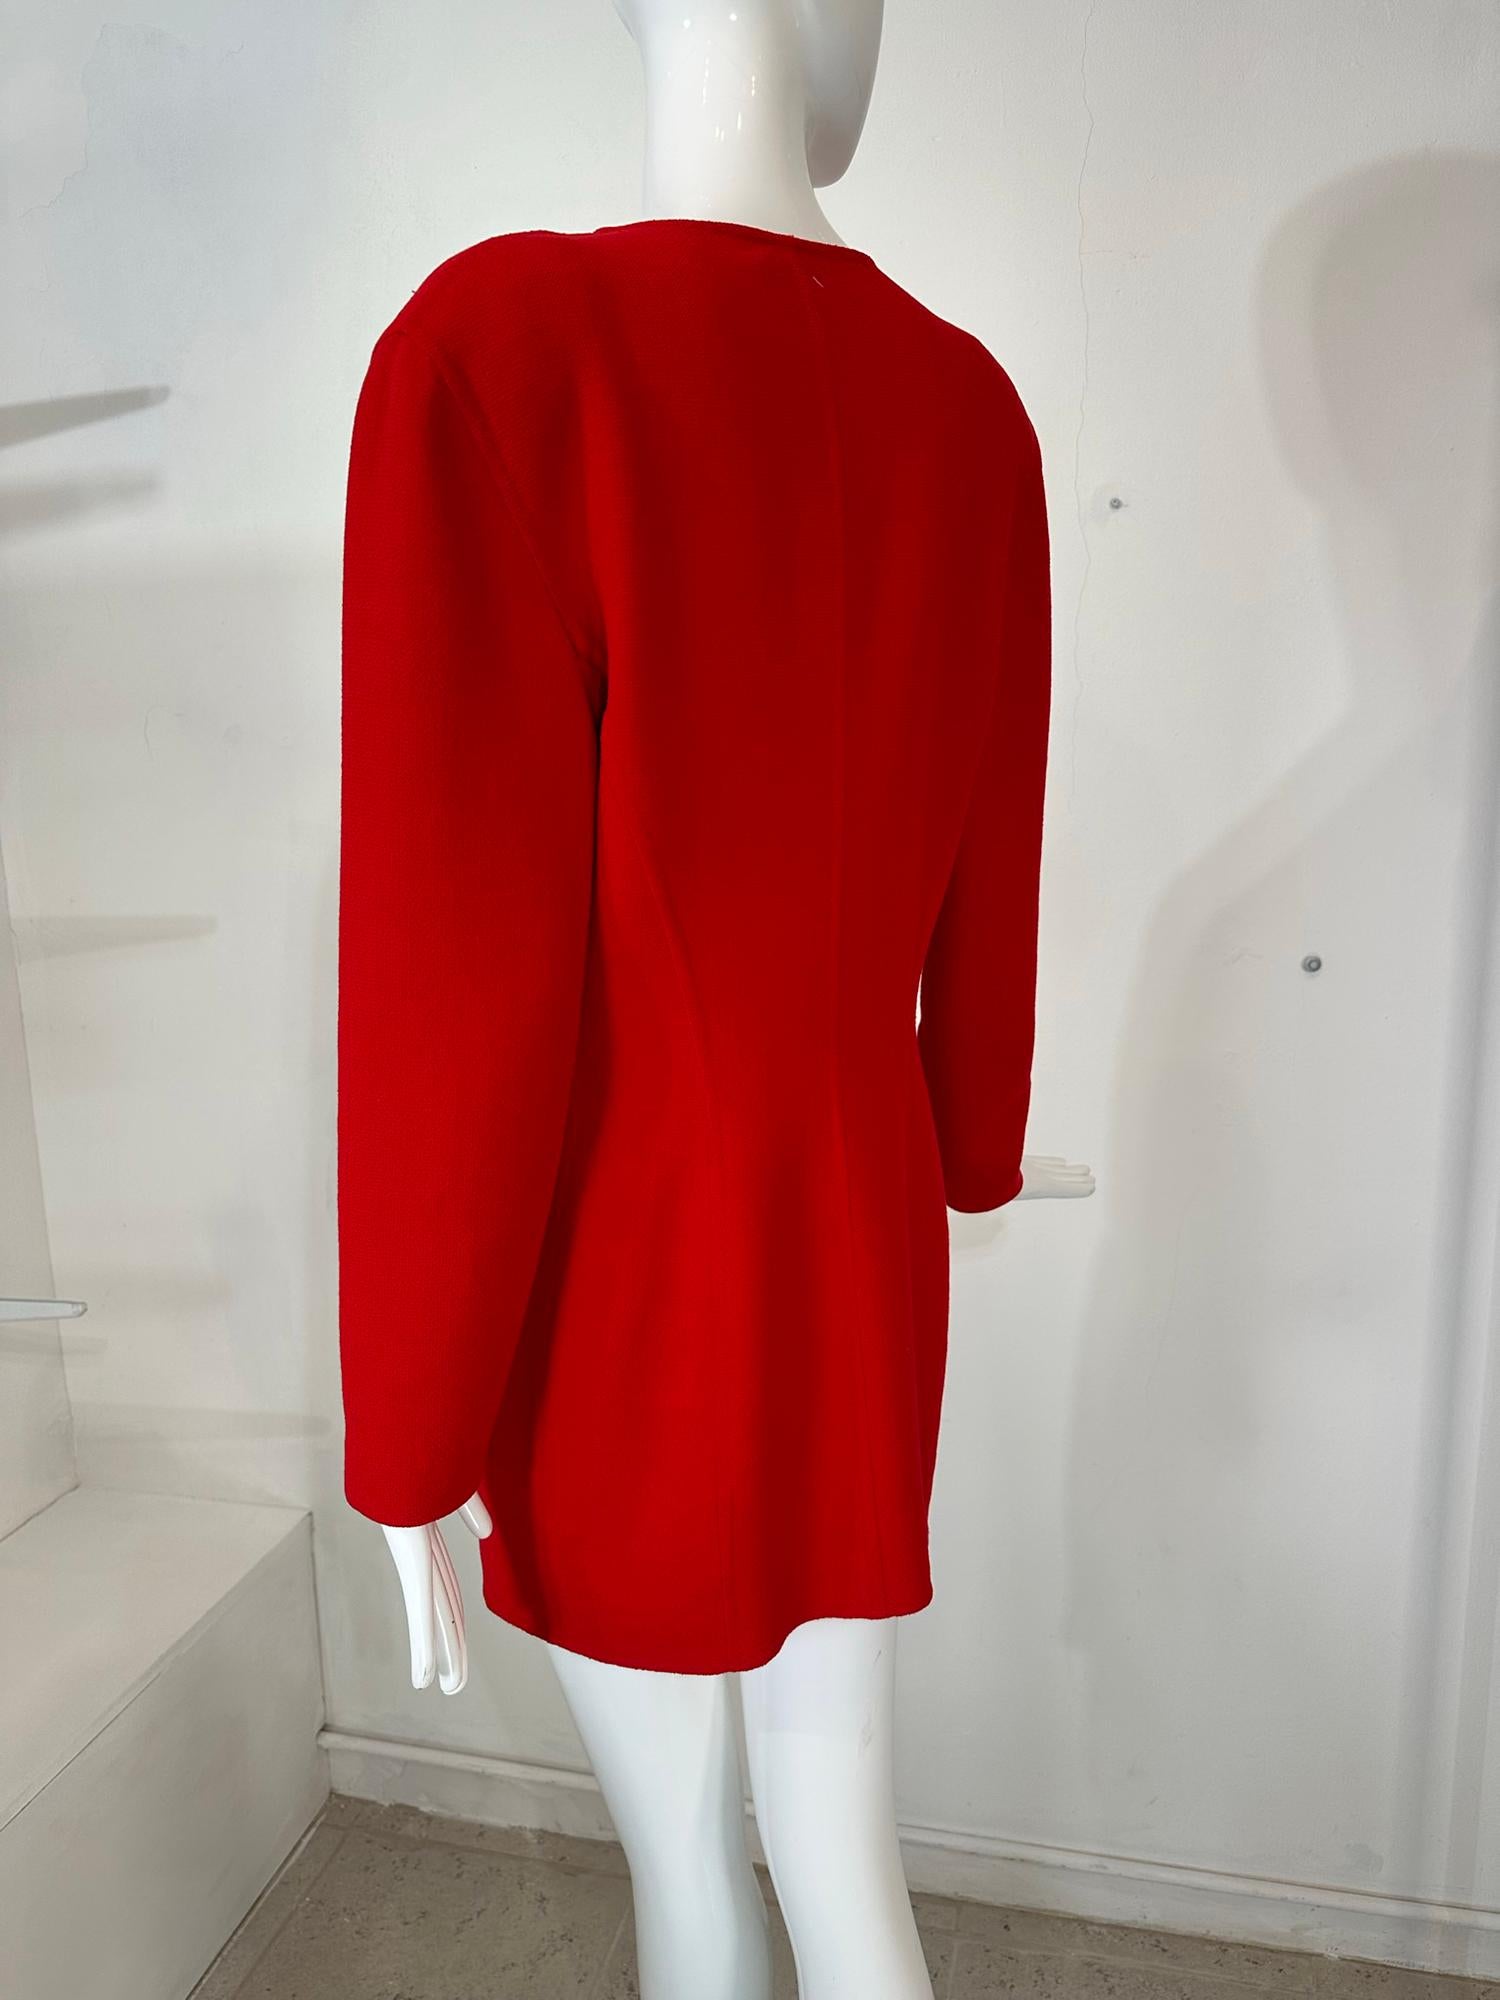 Donna Karan Black Label Fire Engine Red Double Face Wool Jacket For Sale 3